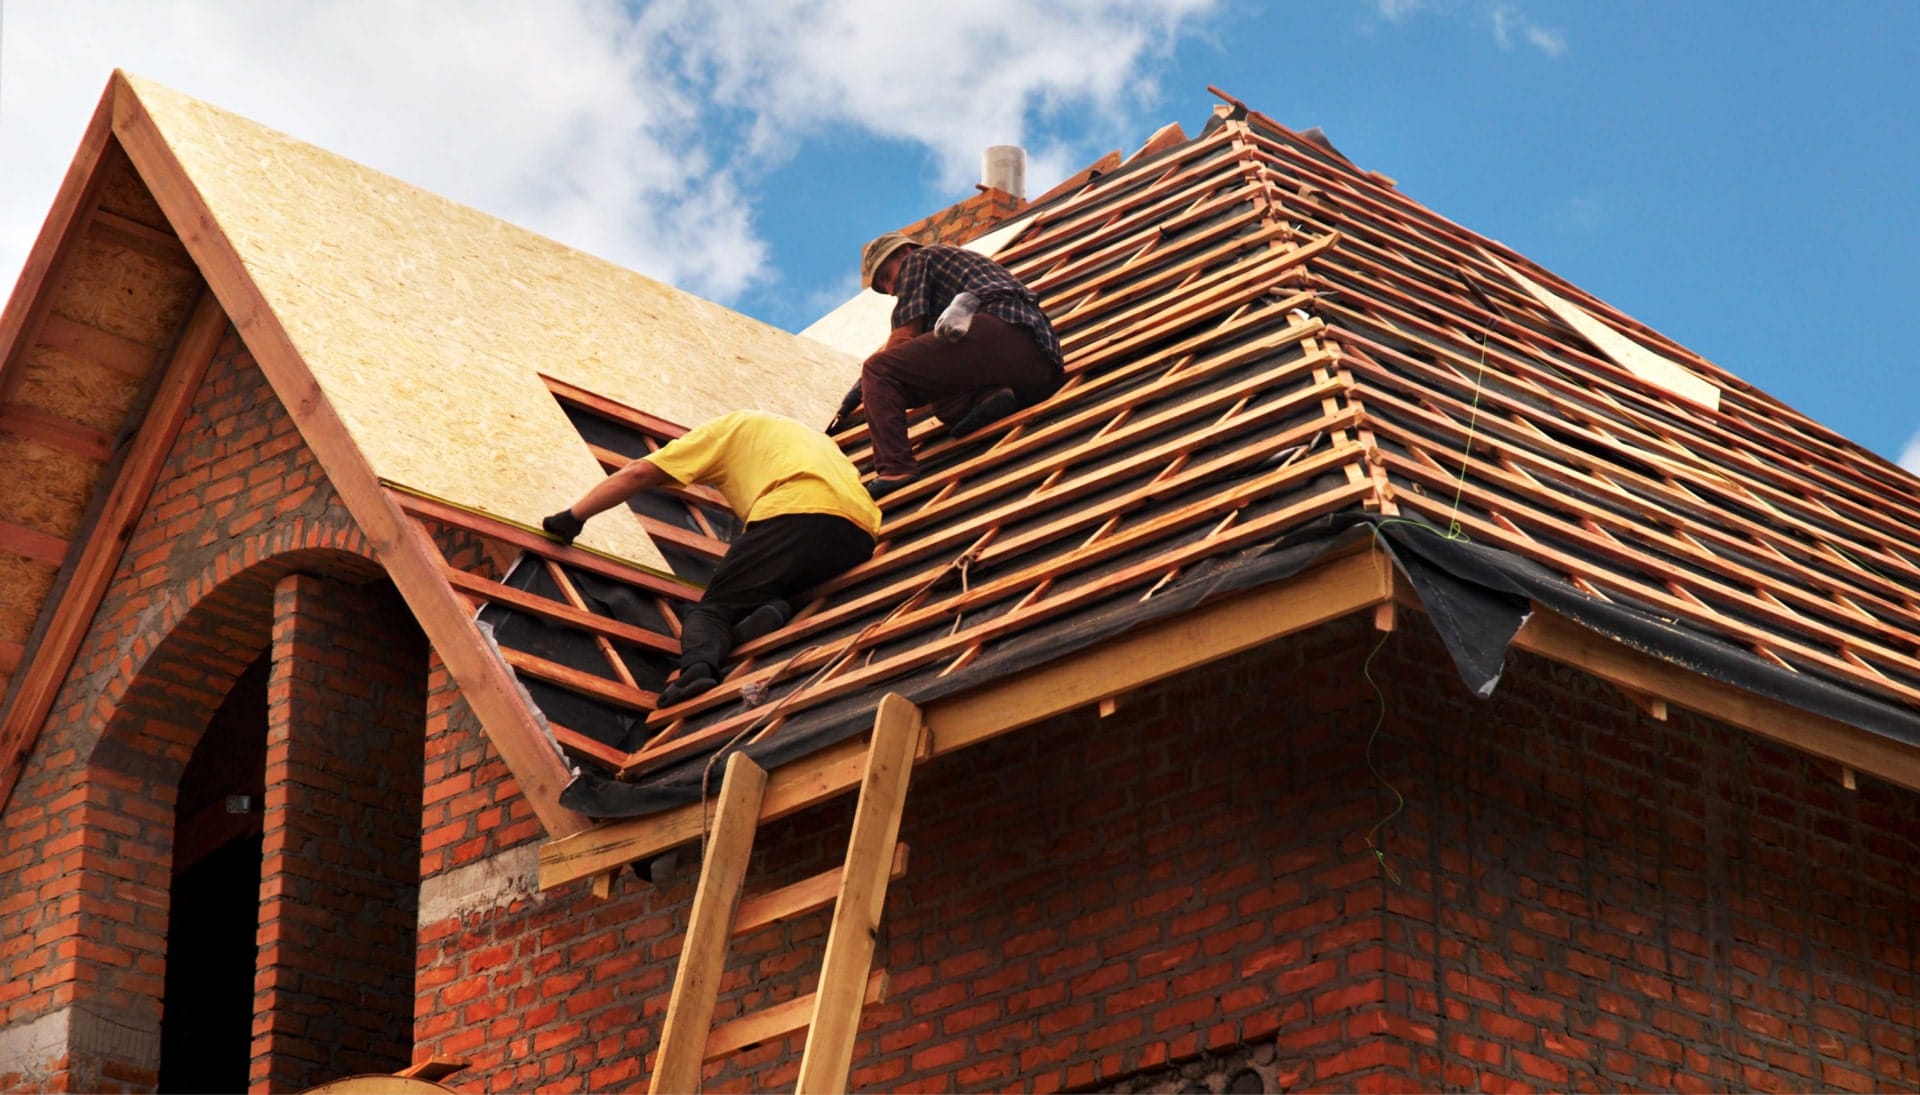 Trustworthy professional roofing services in Long Island, New York with years of industry expertise.